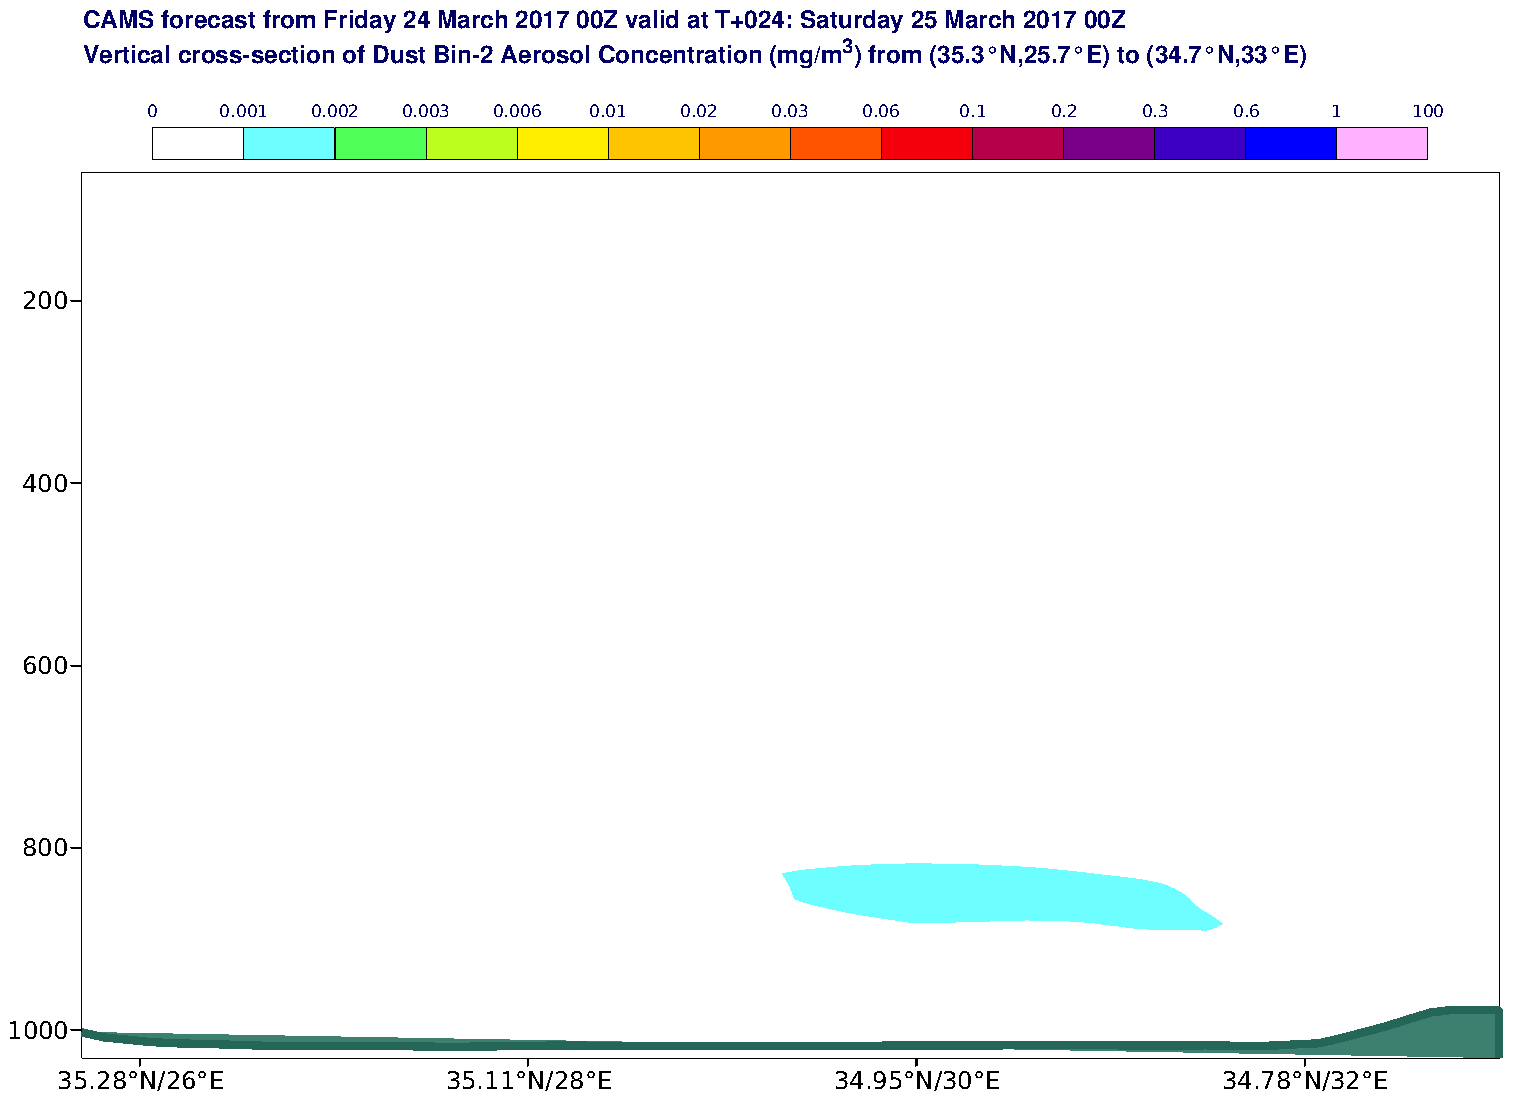 Vertical cross-section of Dust Bin-2 Aerosol Concentration (mg/m3) valid at T24 - 2017-03-25 00:00